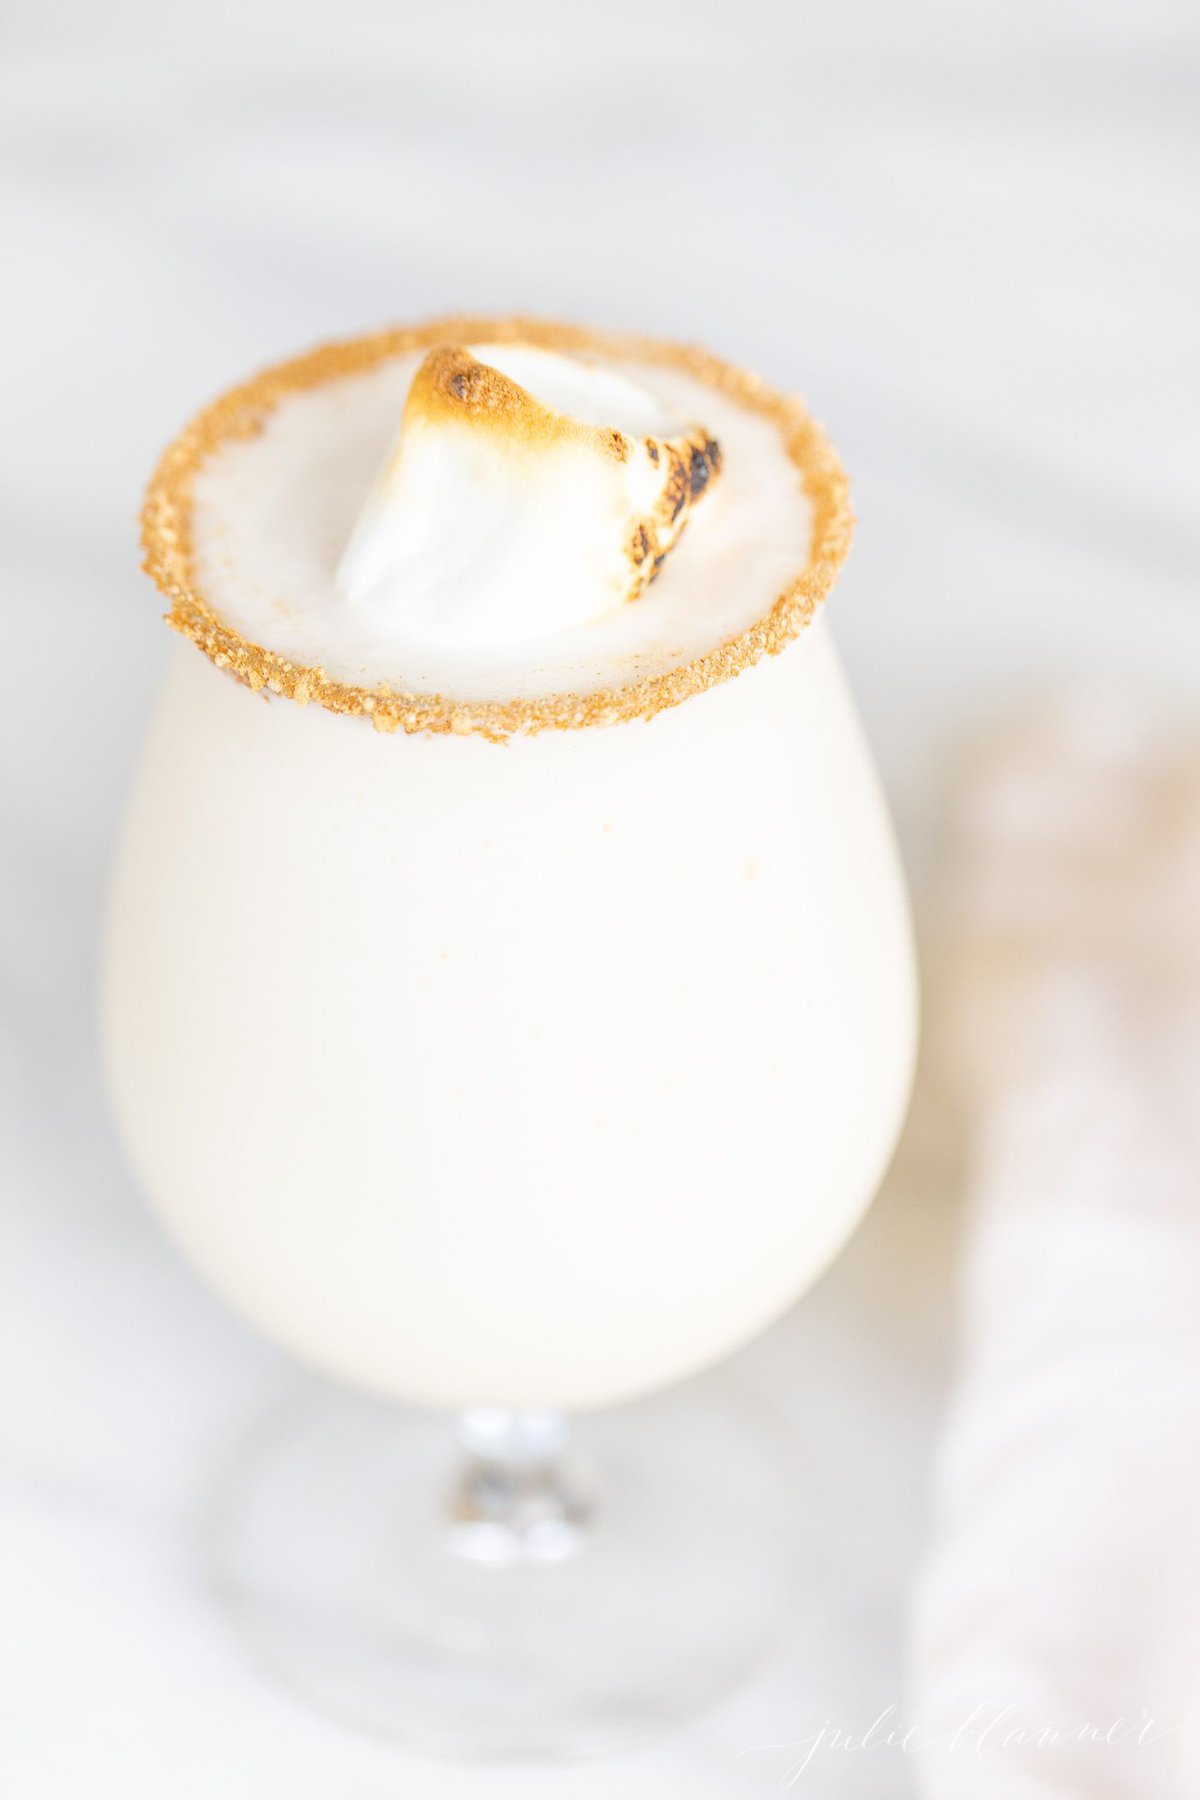 A clear glass with a creamy white Christmas cocktail, topped with a toasted marshmallow.